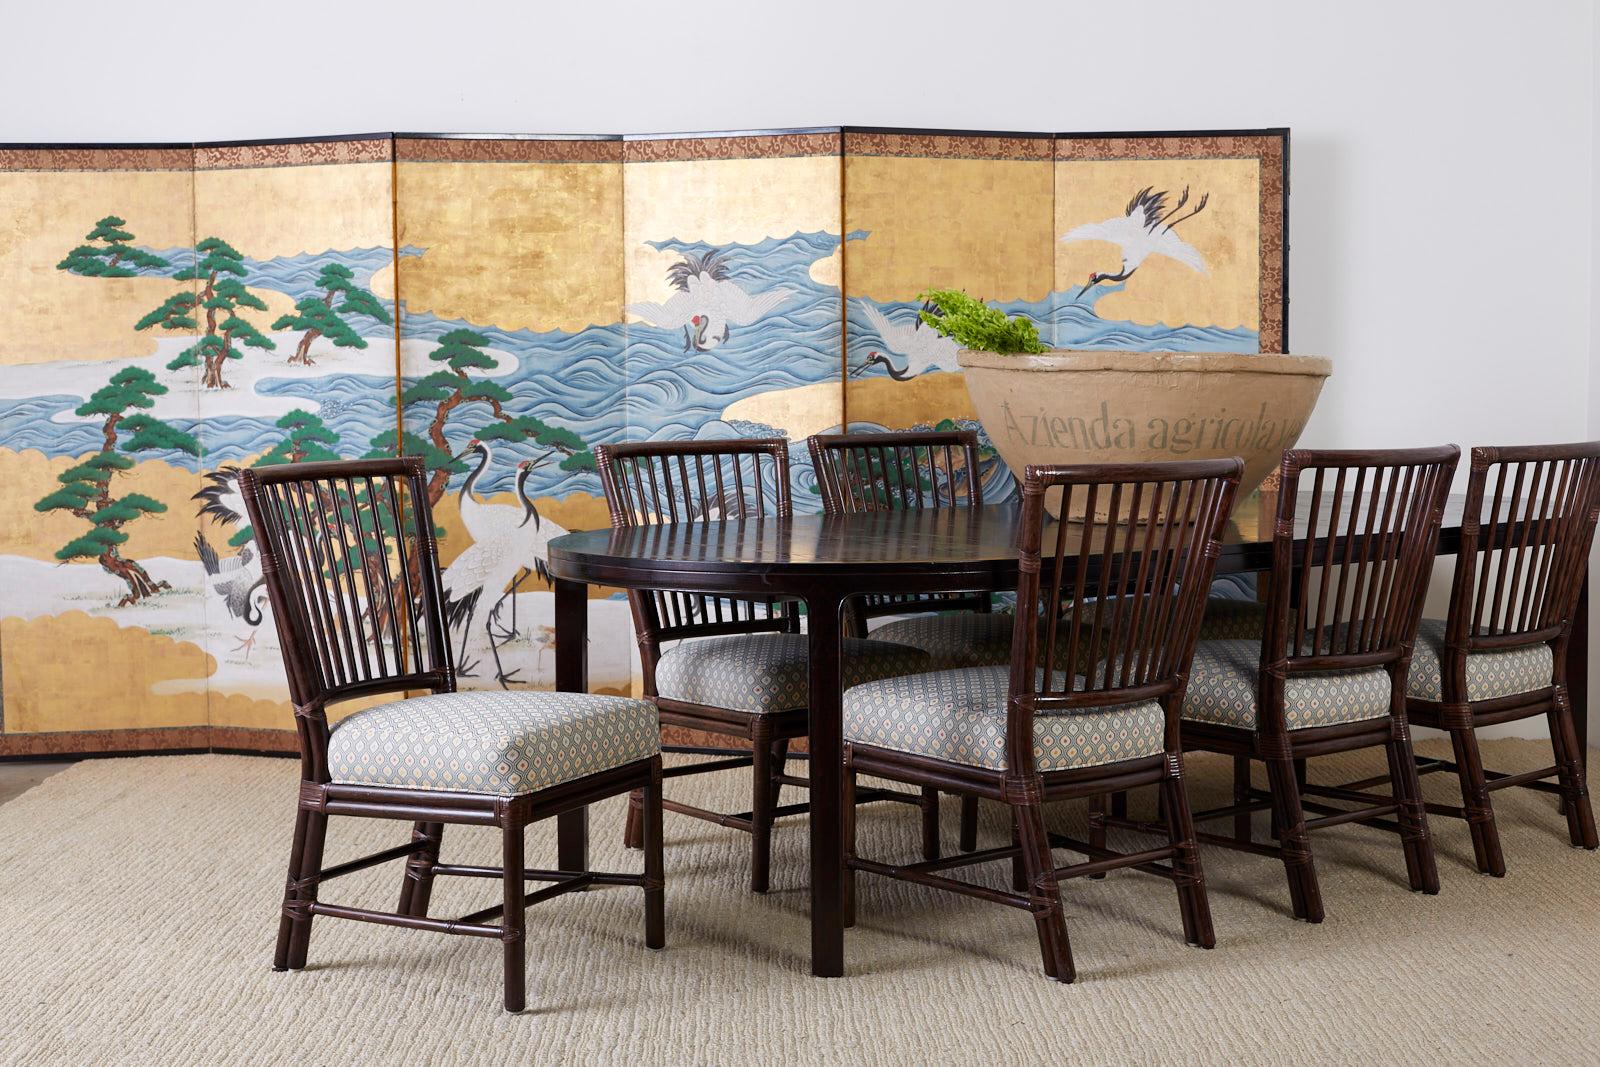 Spectacular 19th century Japanese Meiji period six-panel screen depicting hamamatsu pines with eight large Red Crowned cranes or Manchurian cranes on the sea shore. Made in the Nihonga school style. Ink and color pigments on delicate squares of gold